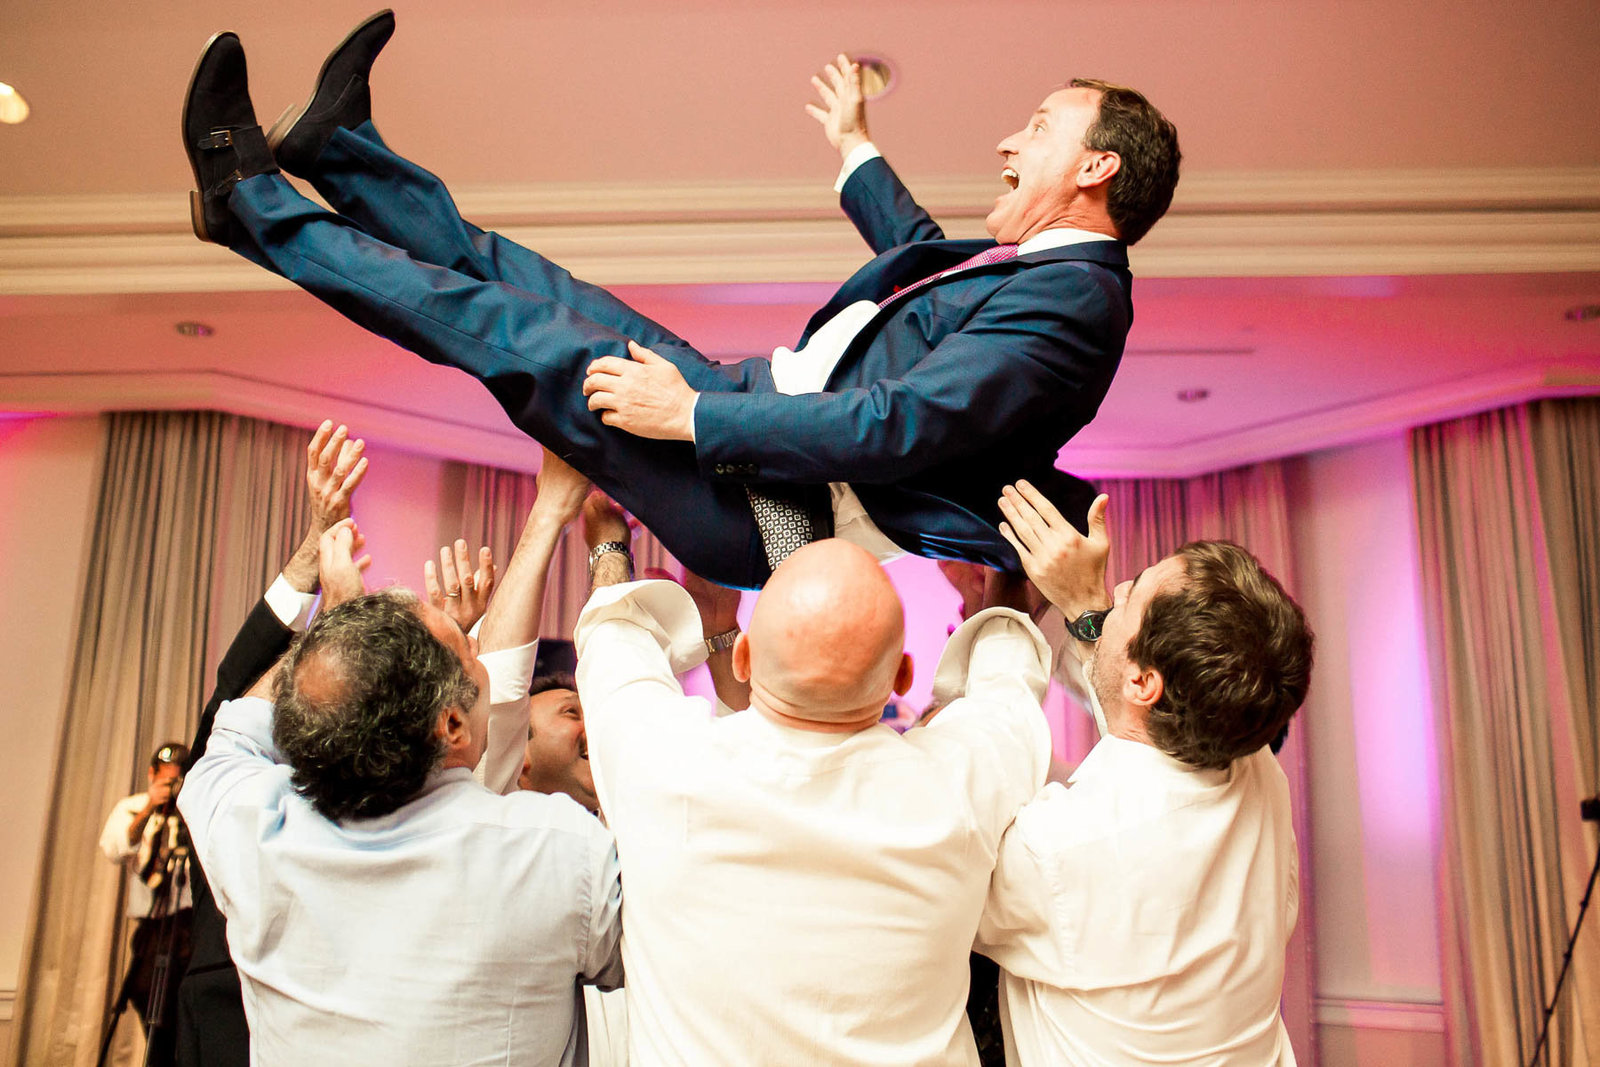 Guests are tossed in the air at reception, Daniel Island Club, Charleston, South Carolina